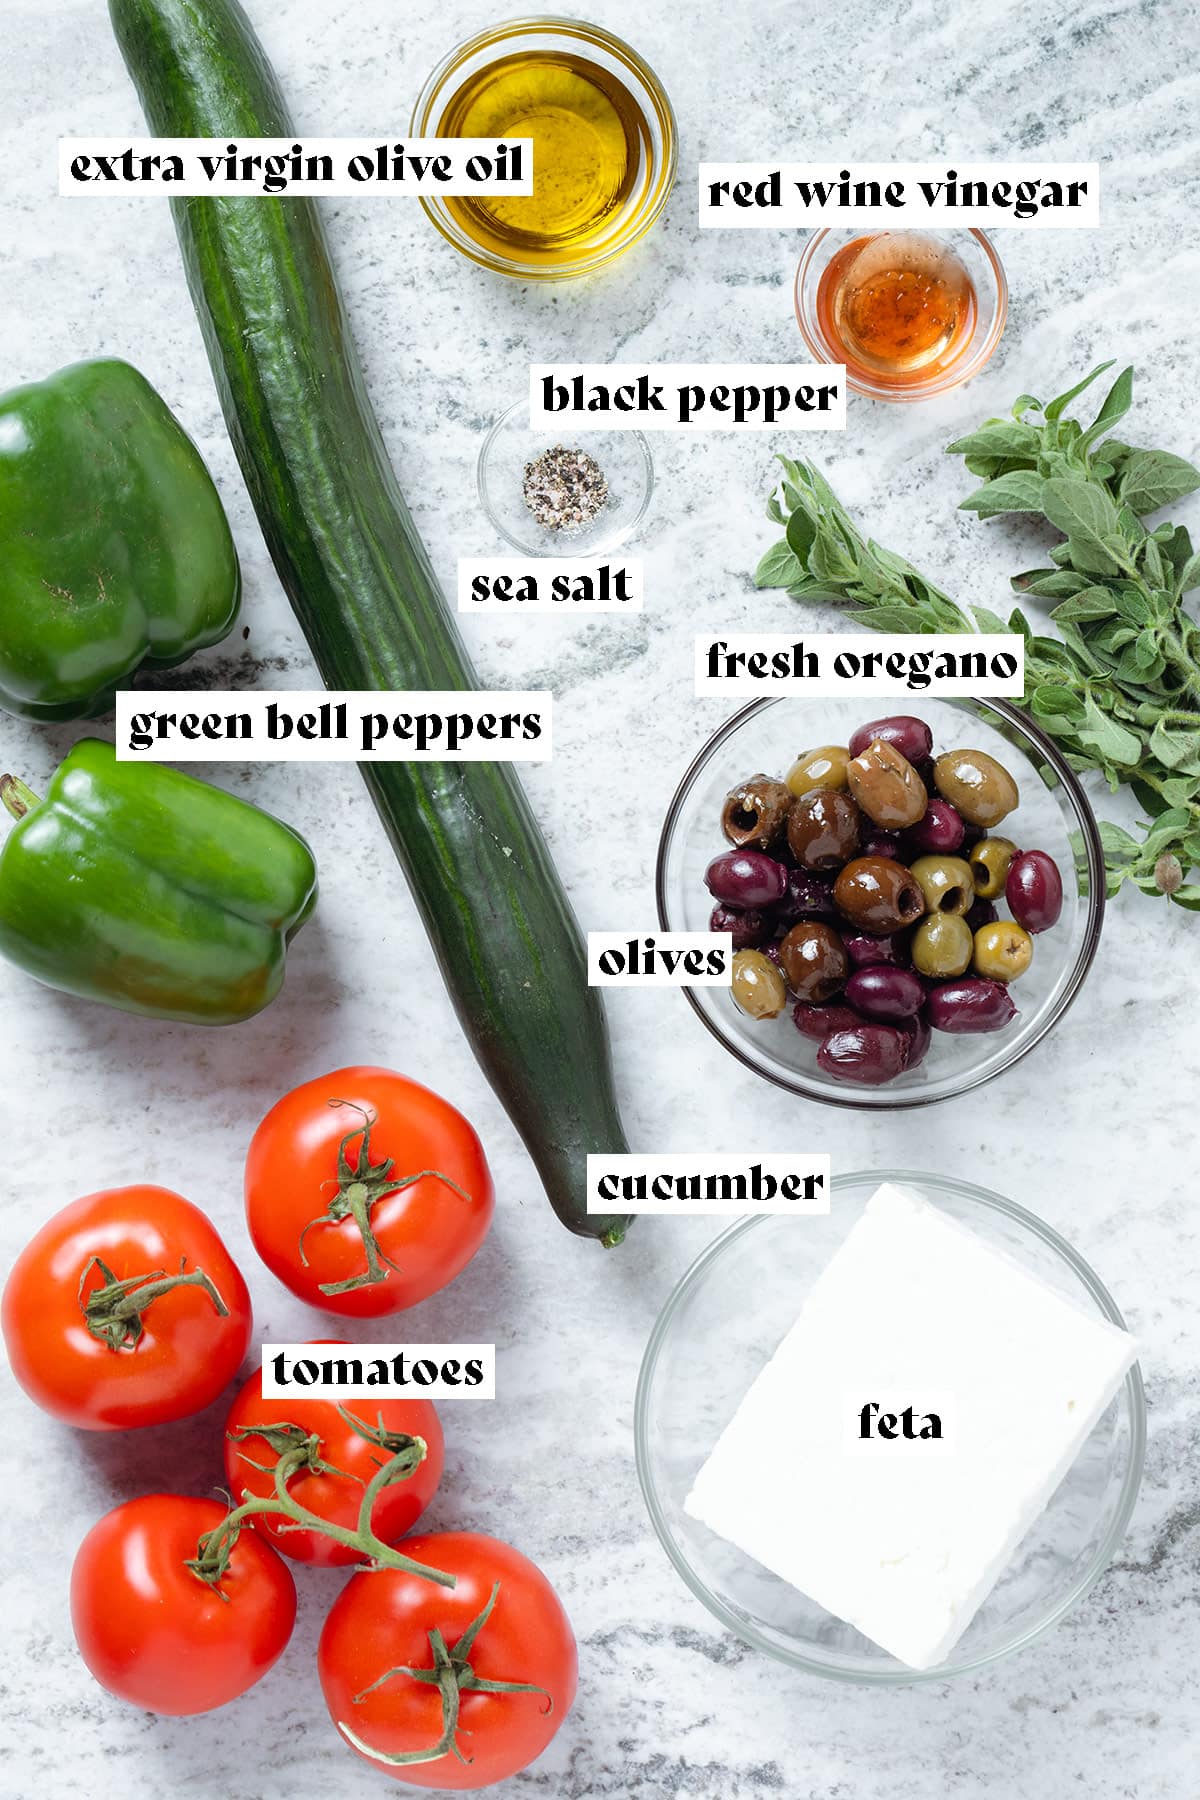 Ingredients for like cucumber, tomatoes, bell peppers, olives, and feta on a stone bagkround.